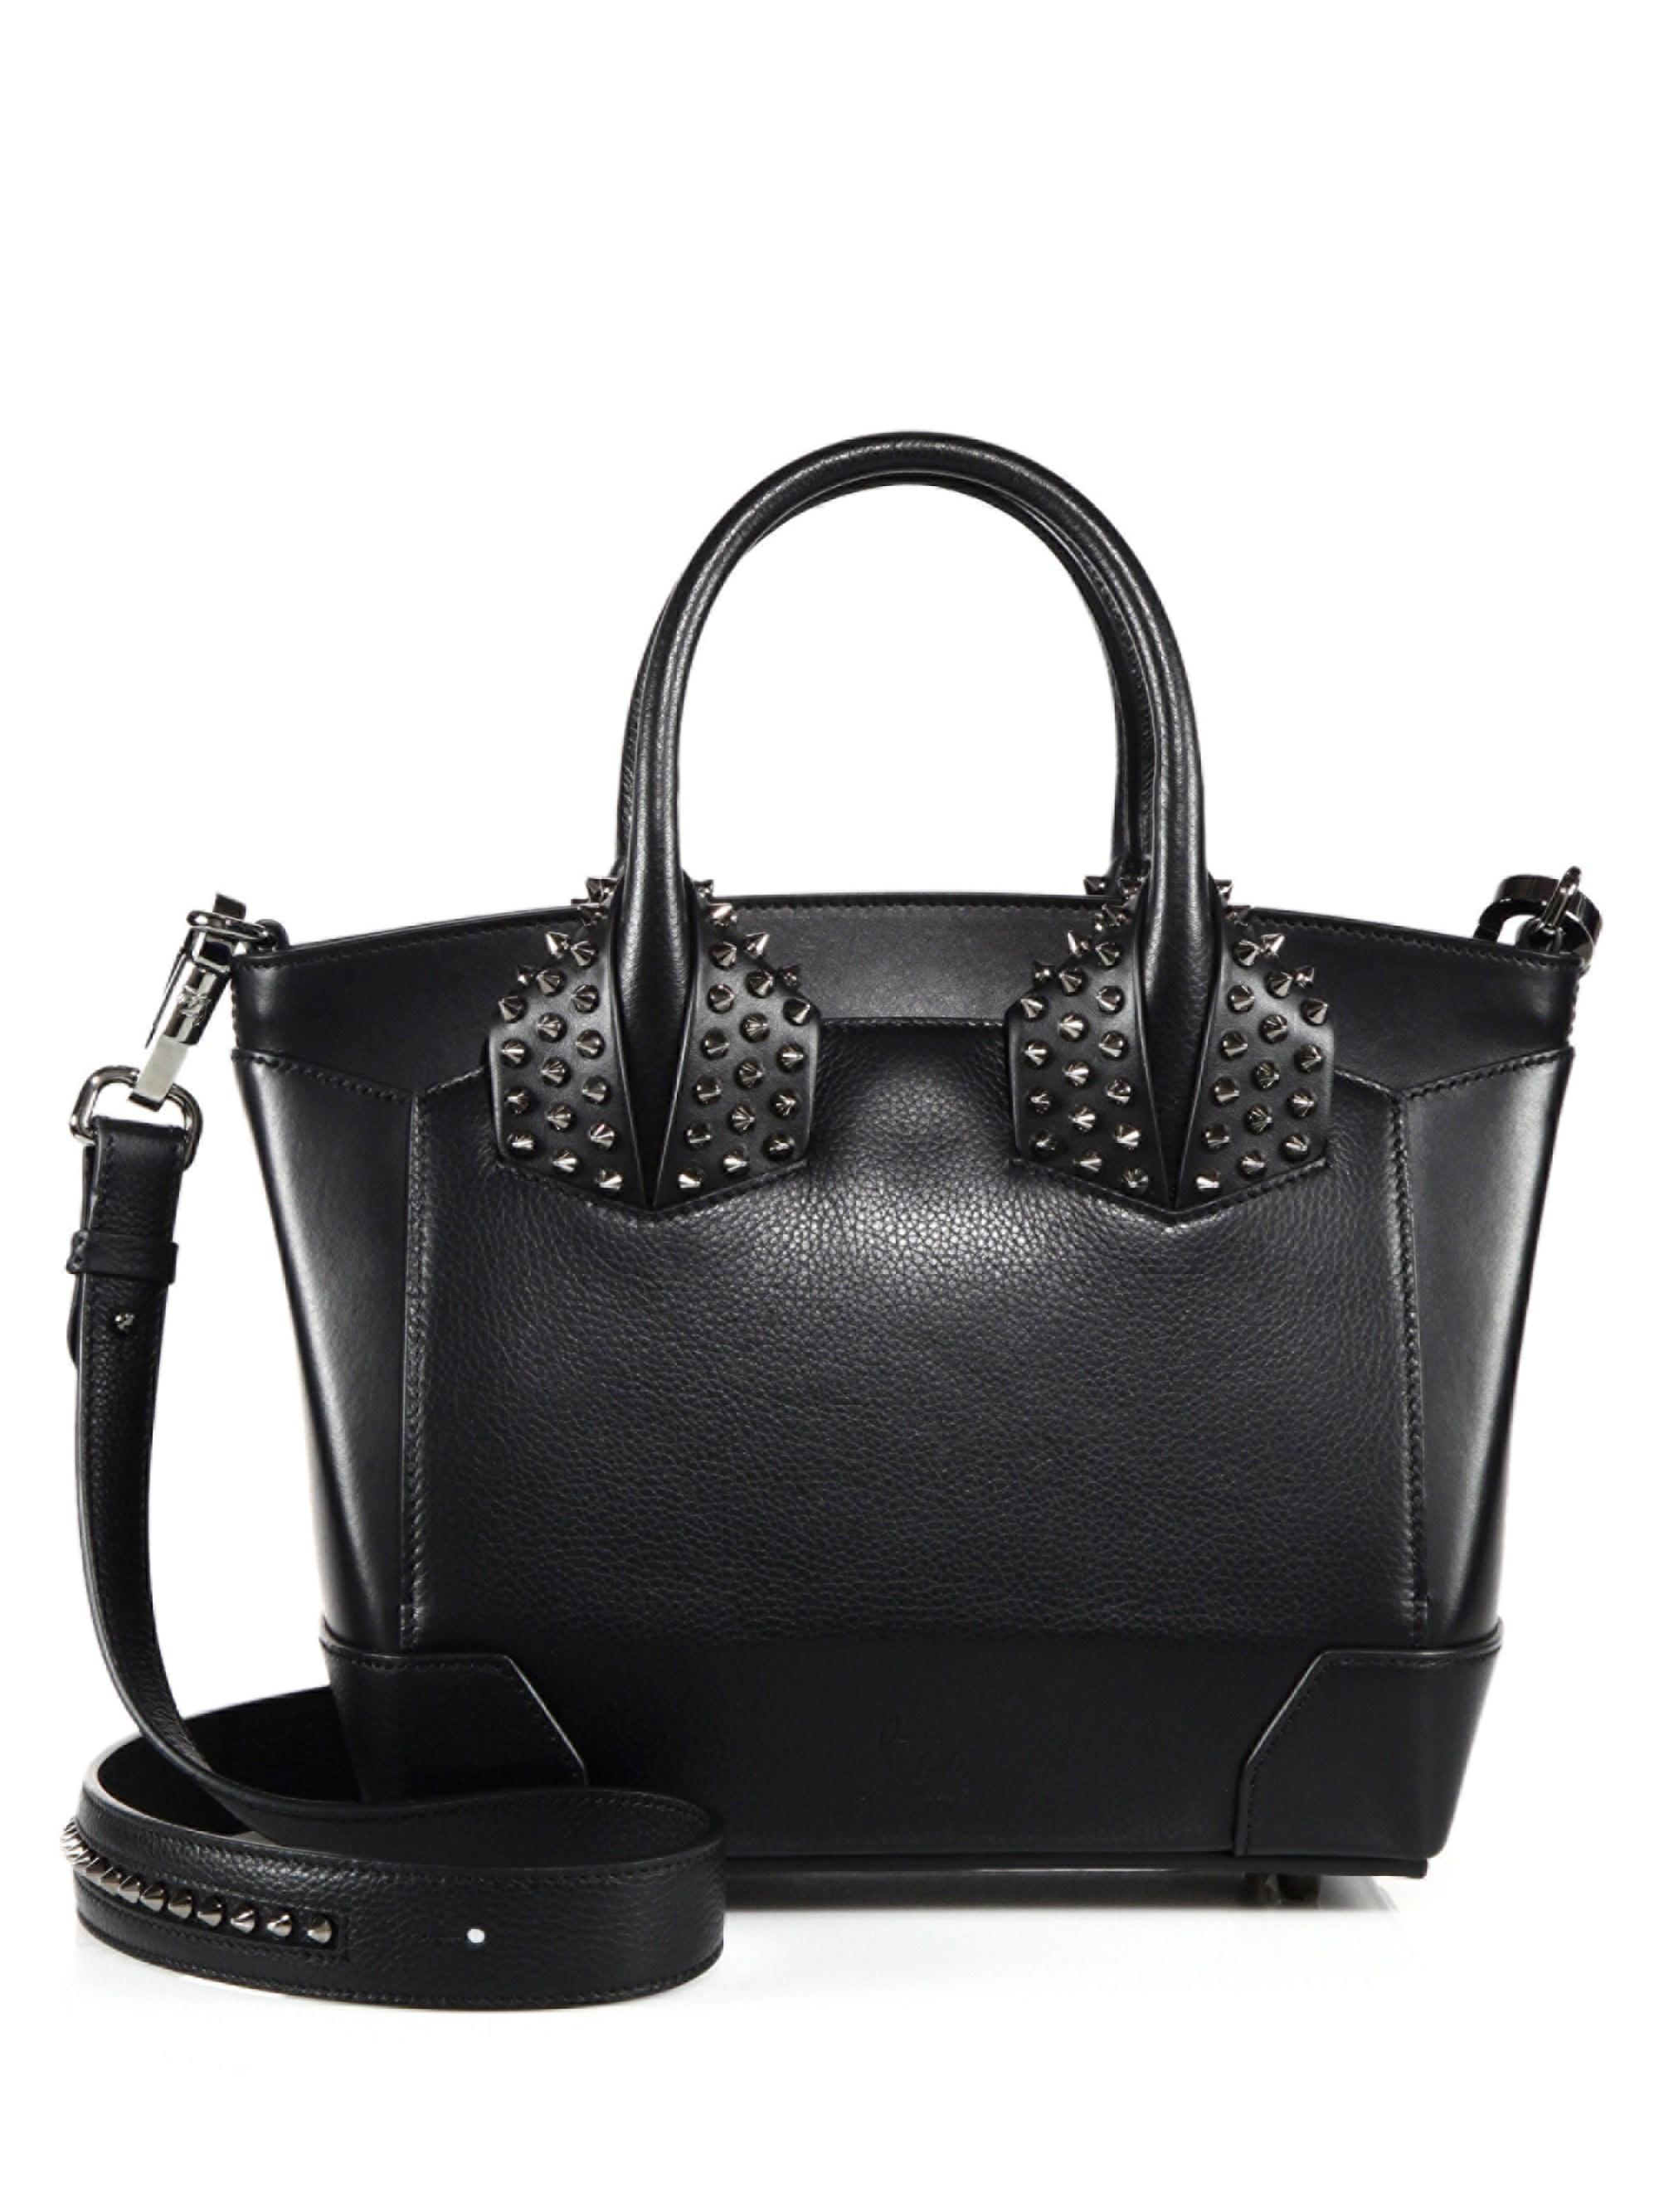 Lyst - Christian Louboutin Eloise Small Studded Leather Satchel in Black